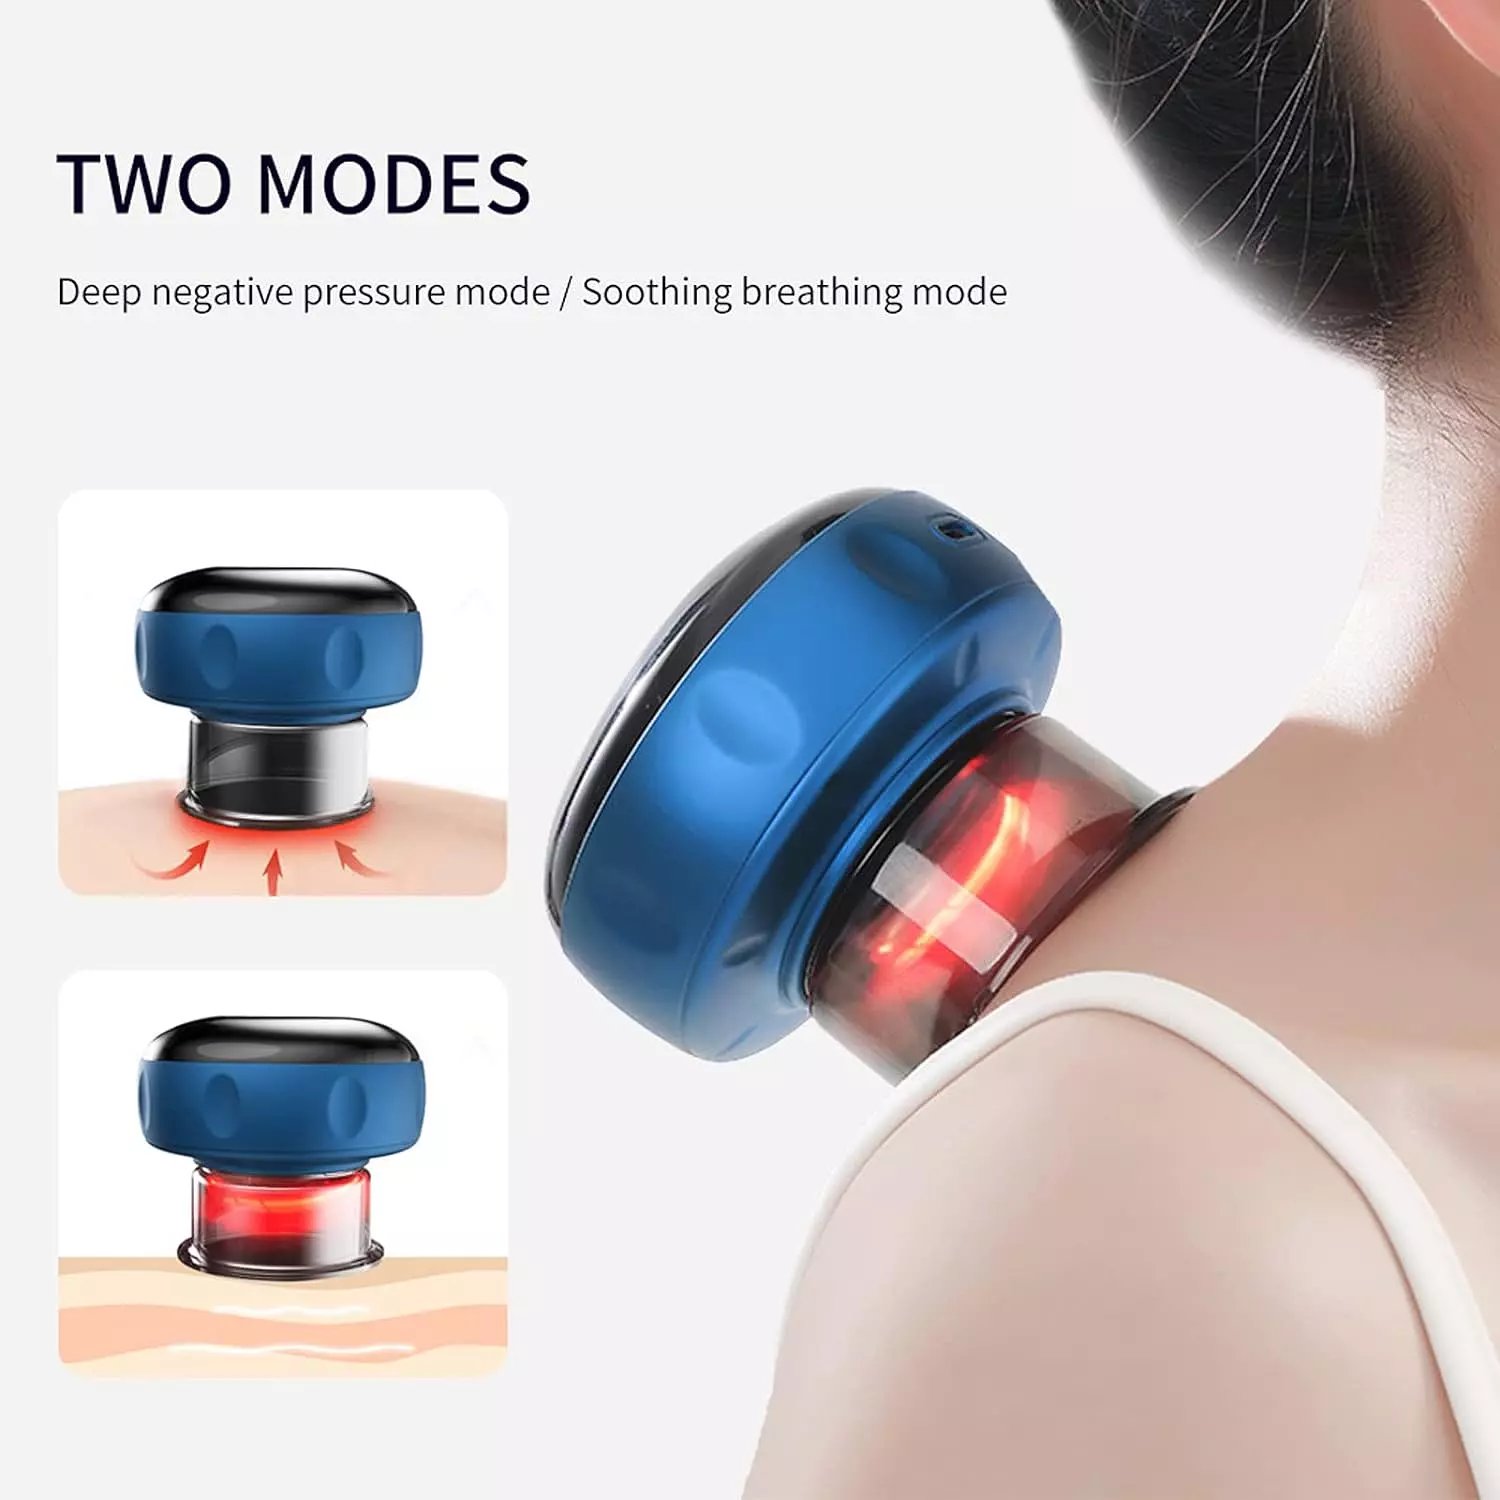 cupping massage device hover image